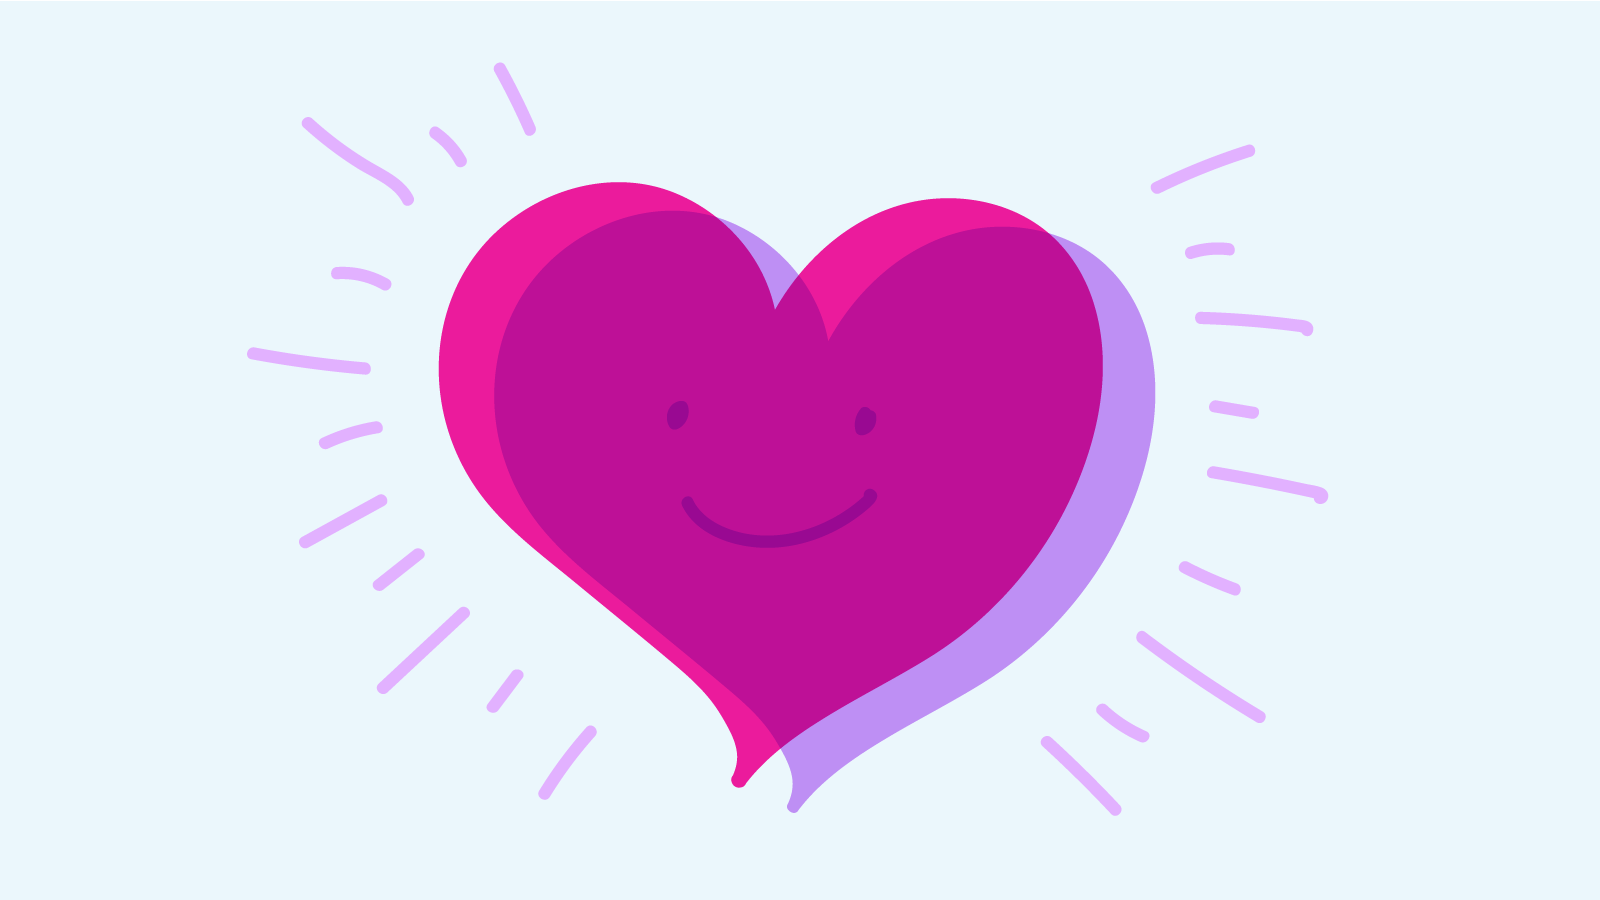 A smiling pink heart